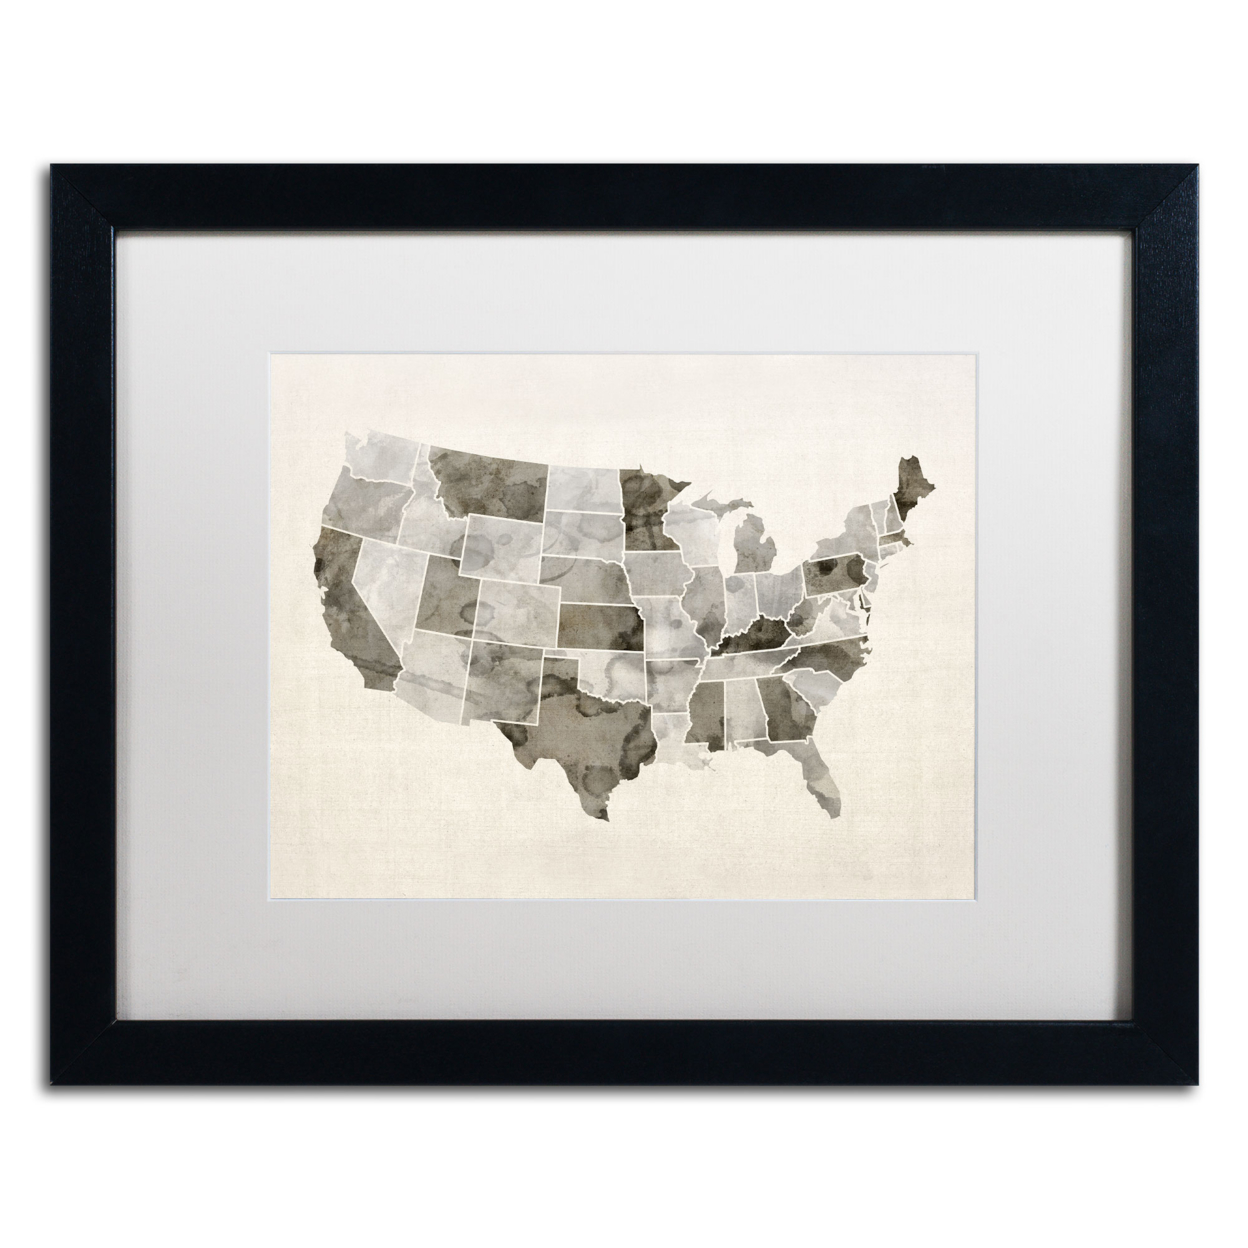 Michael Tompsett 'United States Watercolor Map' Black Wooden Framed Art 18 X 22 Inches